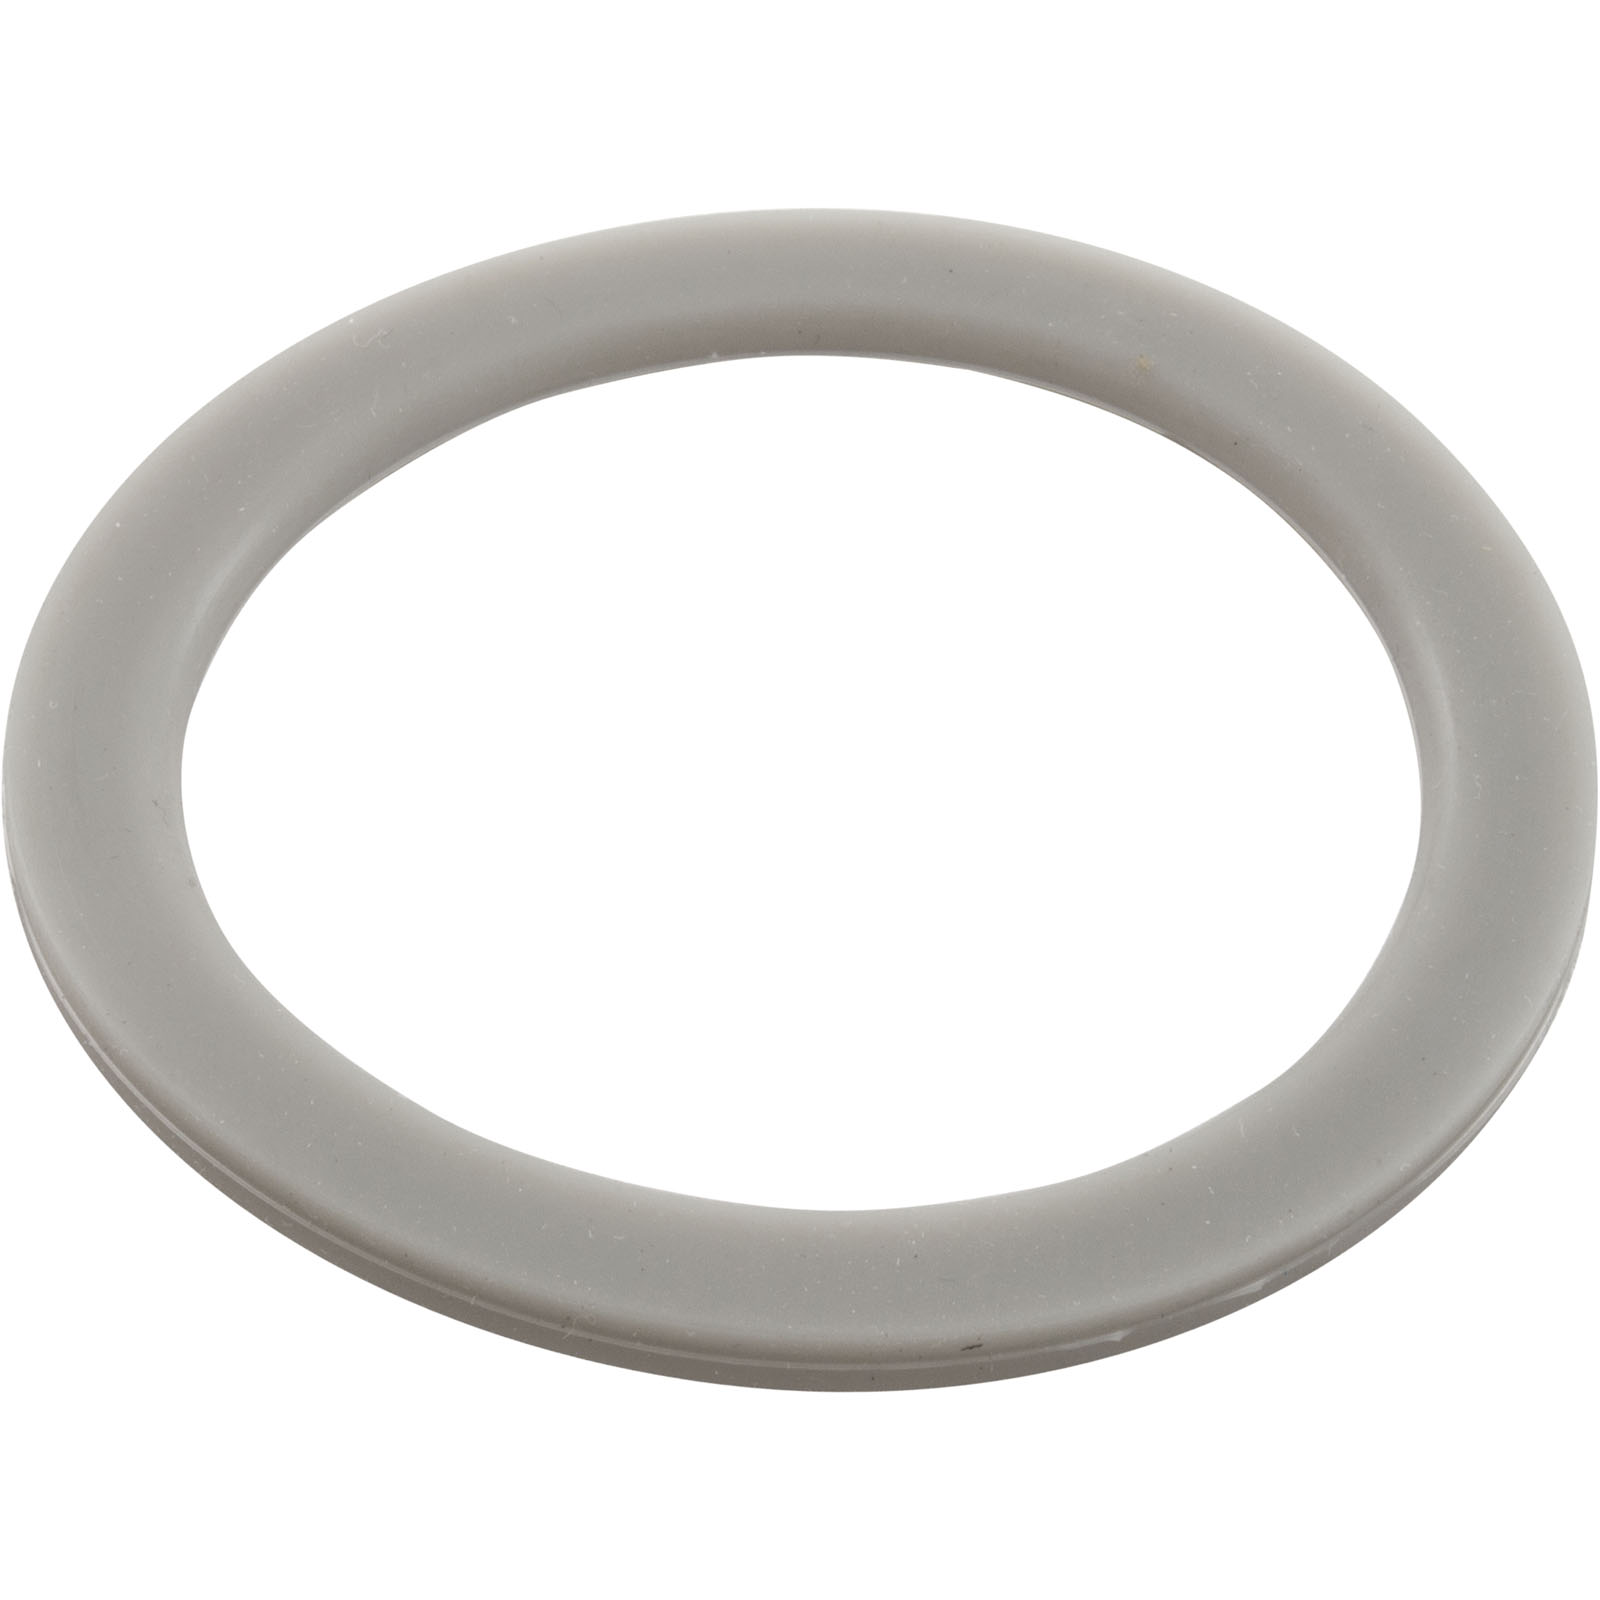 Picture of 23625-319-090 Gasket Wall Fitting CMP Crossfire 2-1/2